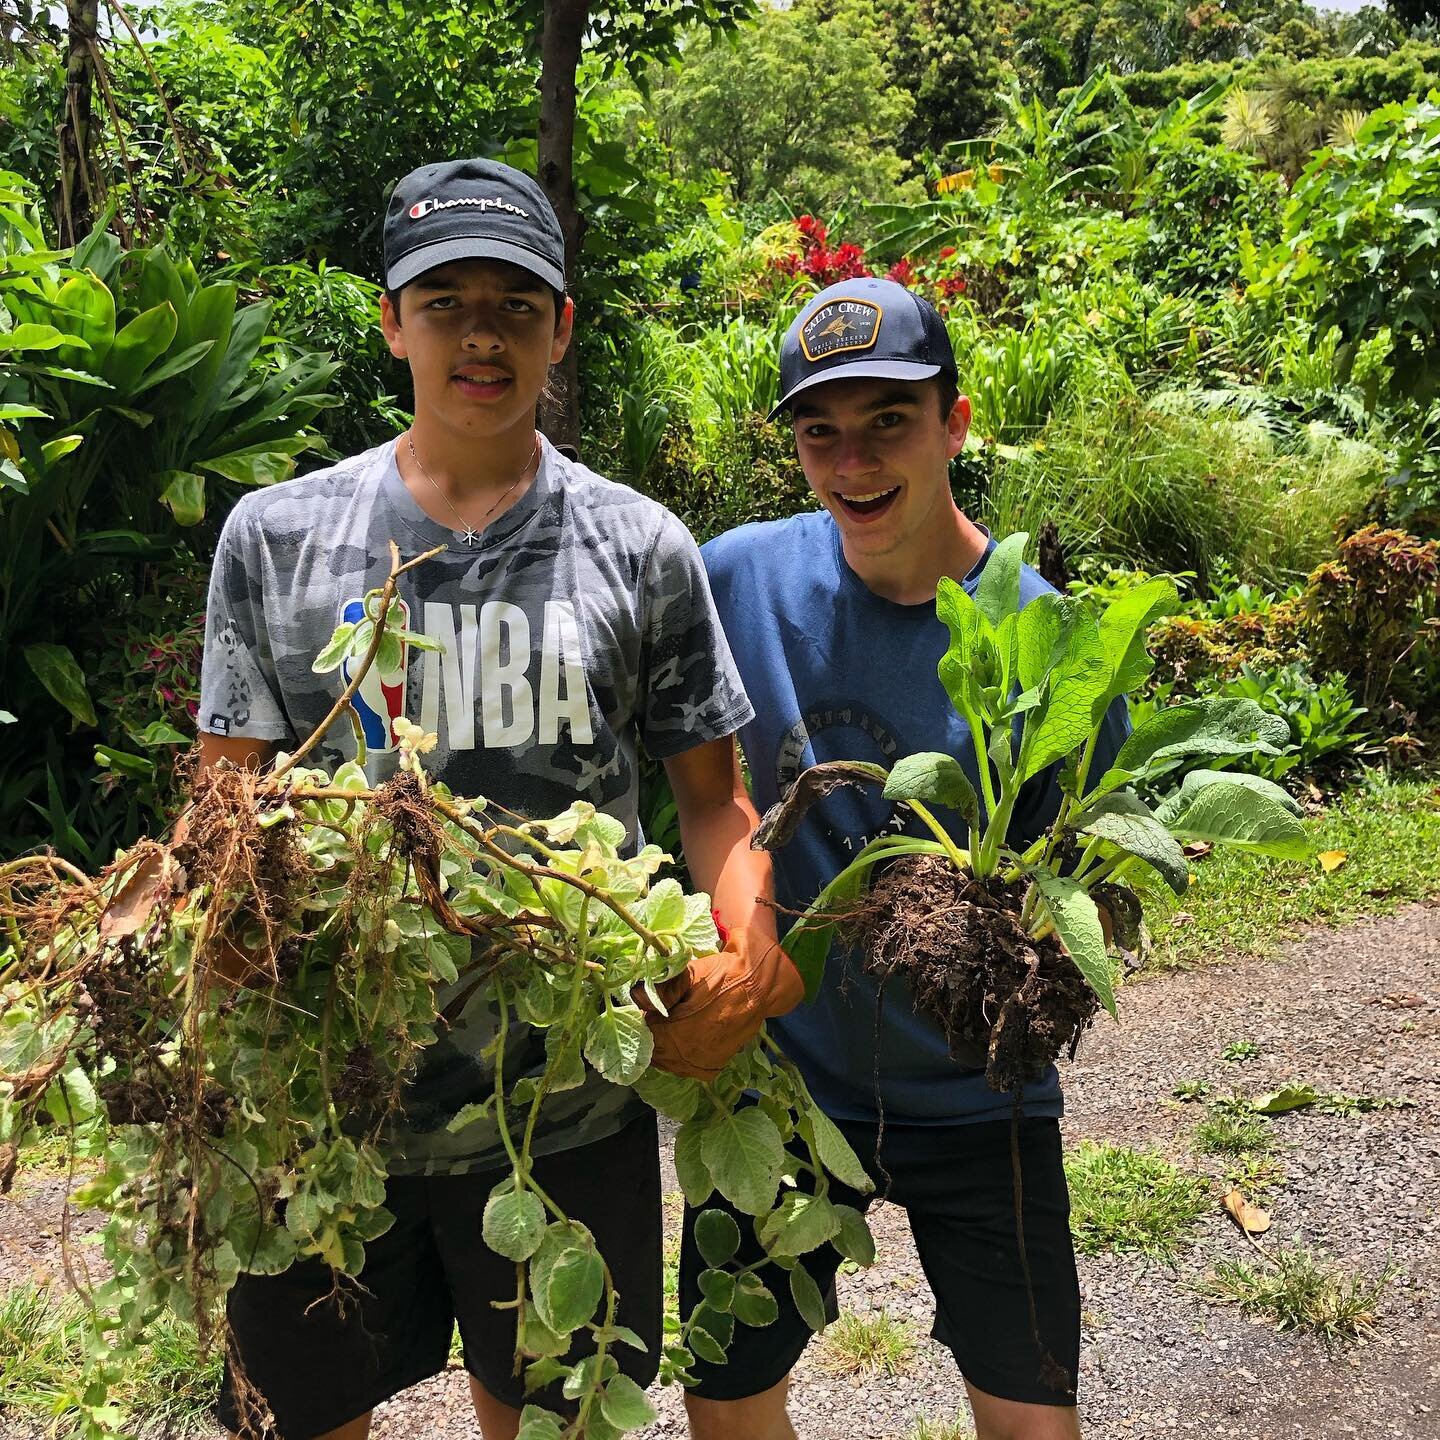 Excited to see this group again tonight for our &lsquo;awa ceremony 🔥! #harvest #plants #plantsofinstagram #medicineplants #organic #maui #mauihawaii #retreats #studenttravel #outdooreducation #volunteeronvacation #transformationaltravel